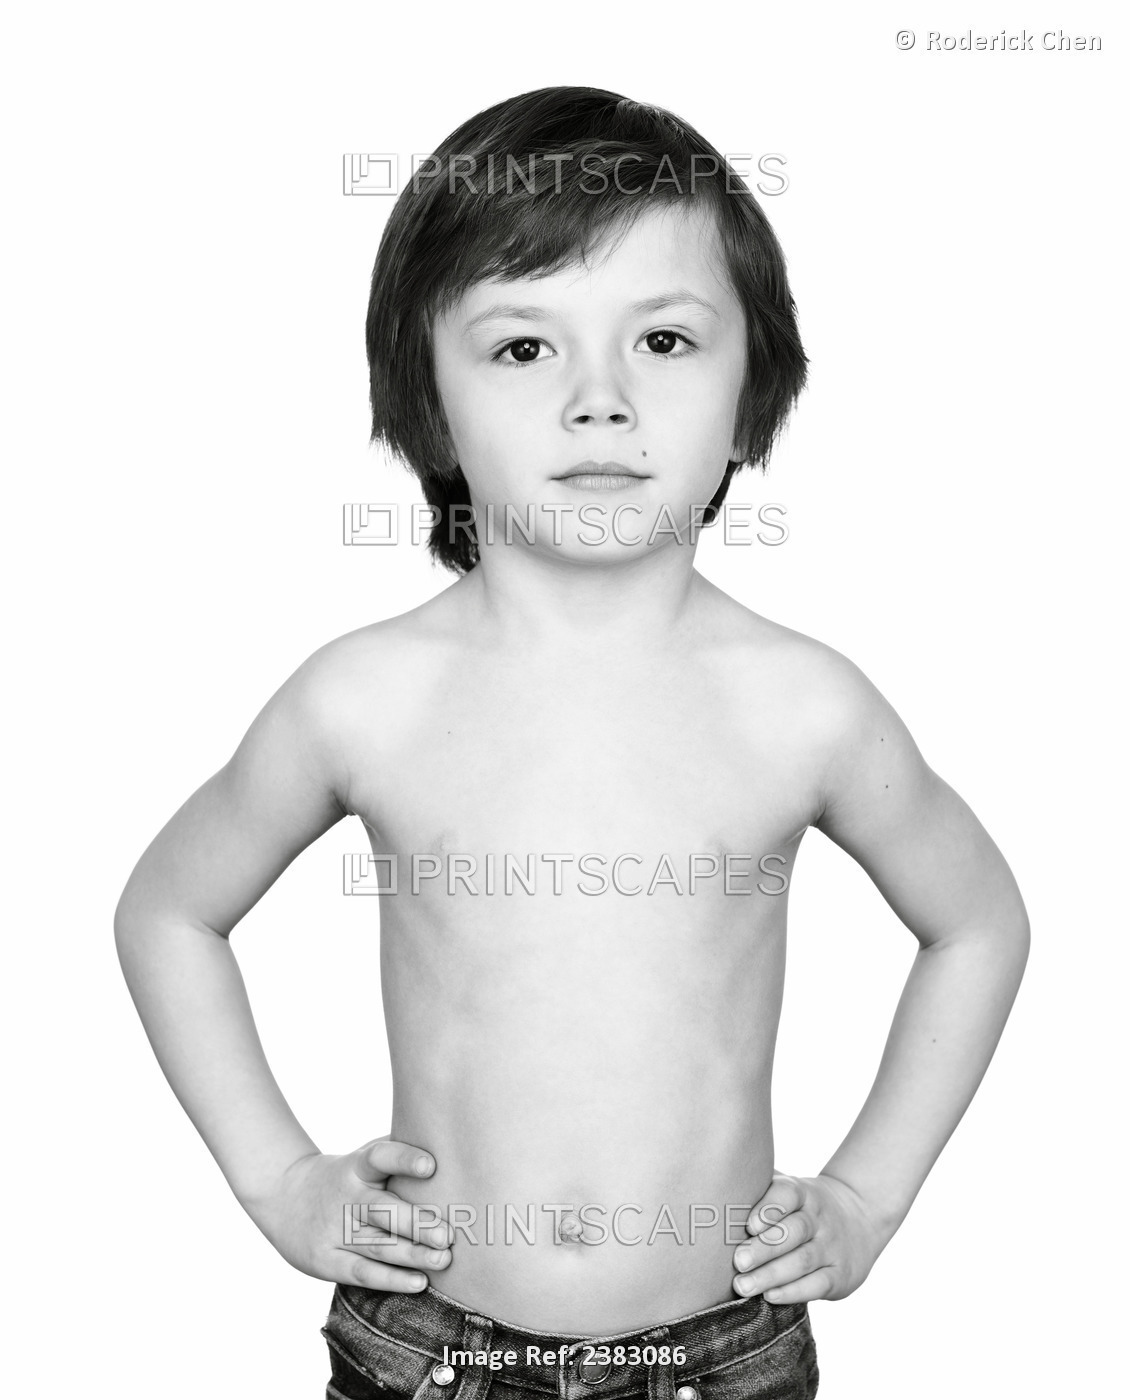 Portrait Of A Shirtless Young Boy; Montreal, Quebec, Canada